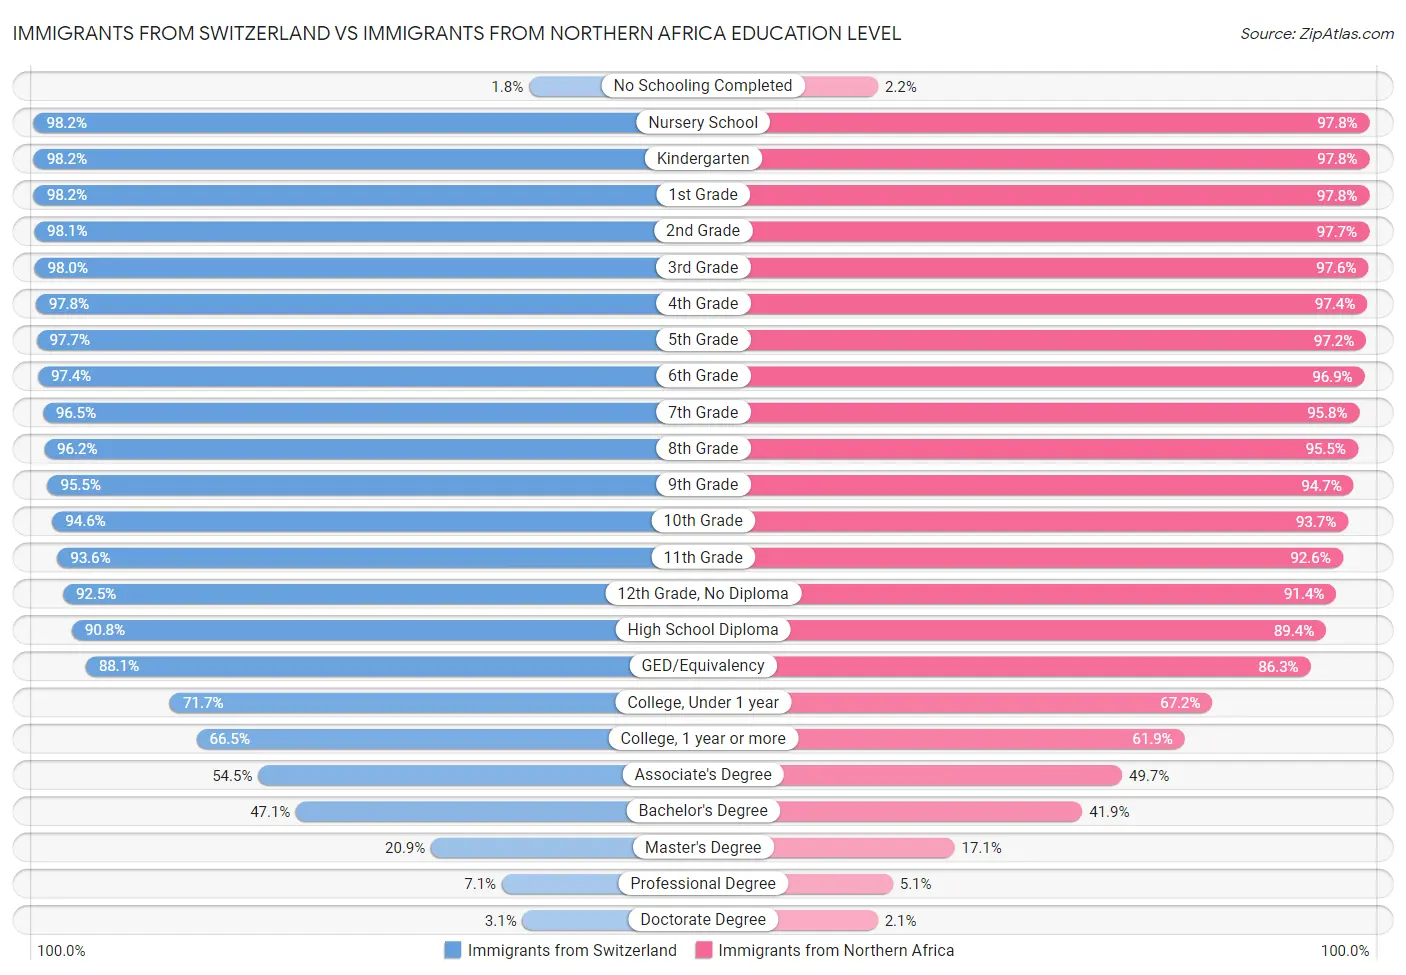 Immigrants from Switzerland vs Immigrants from Northern Africa Education Level